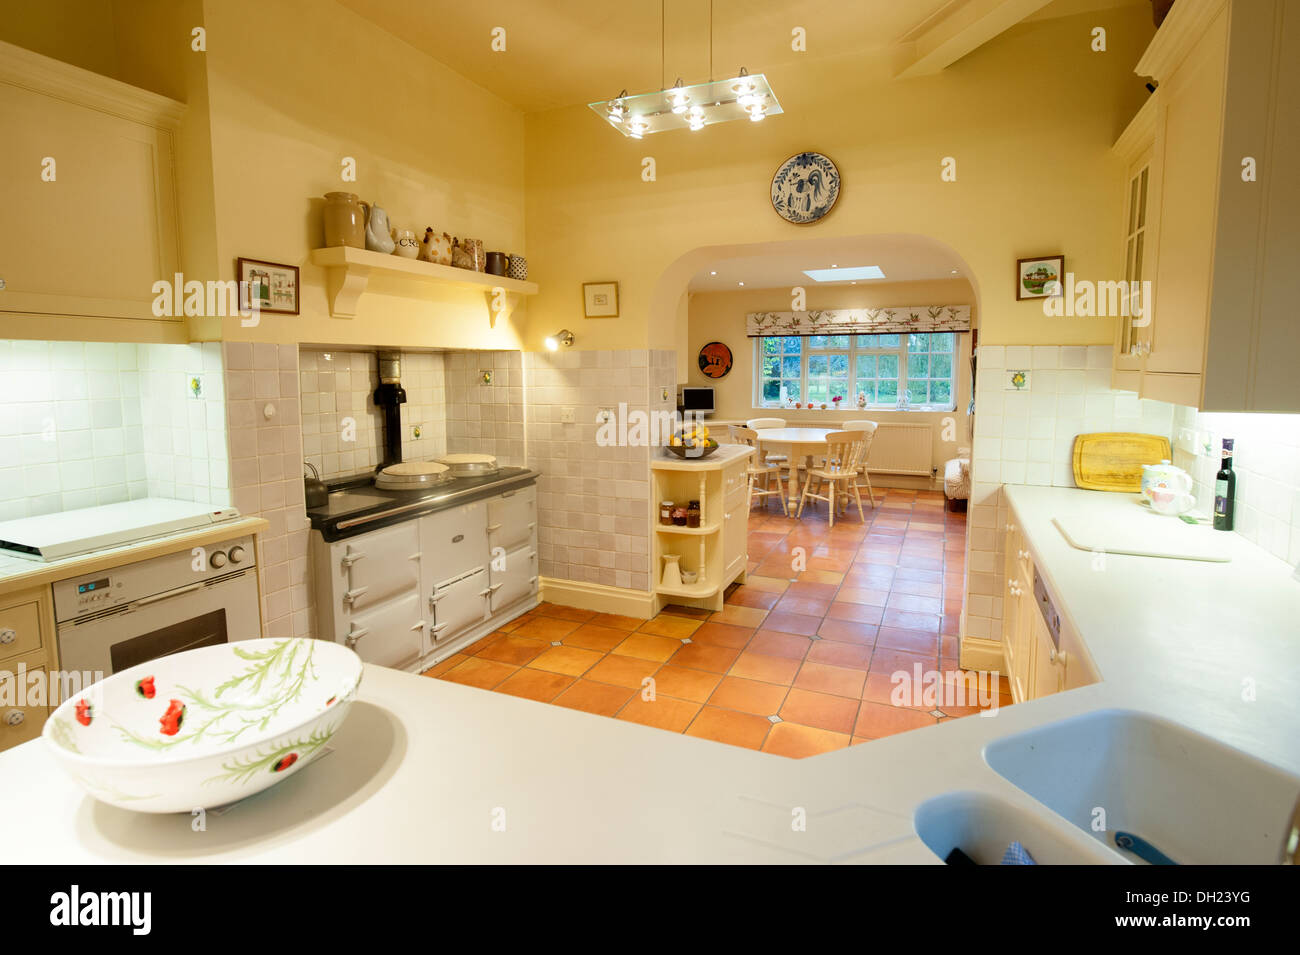 Kitchen Diner through room country style modern Stock Photo